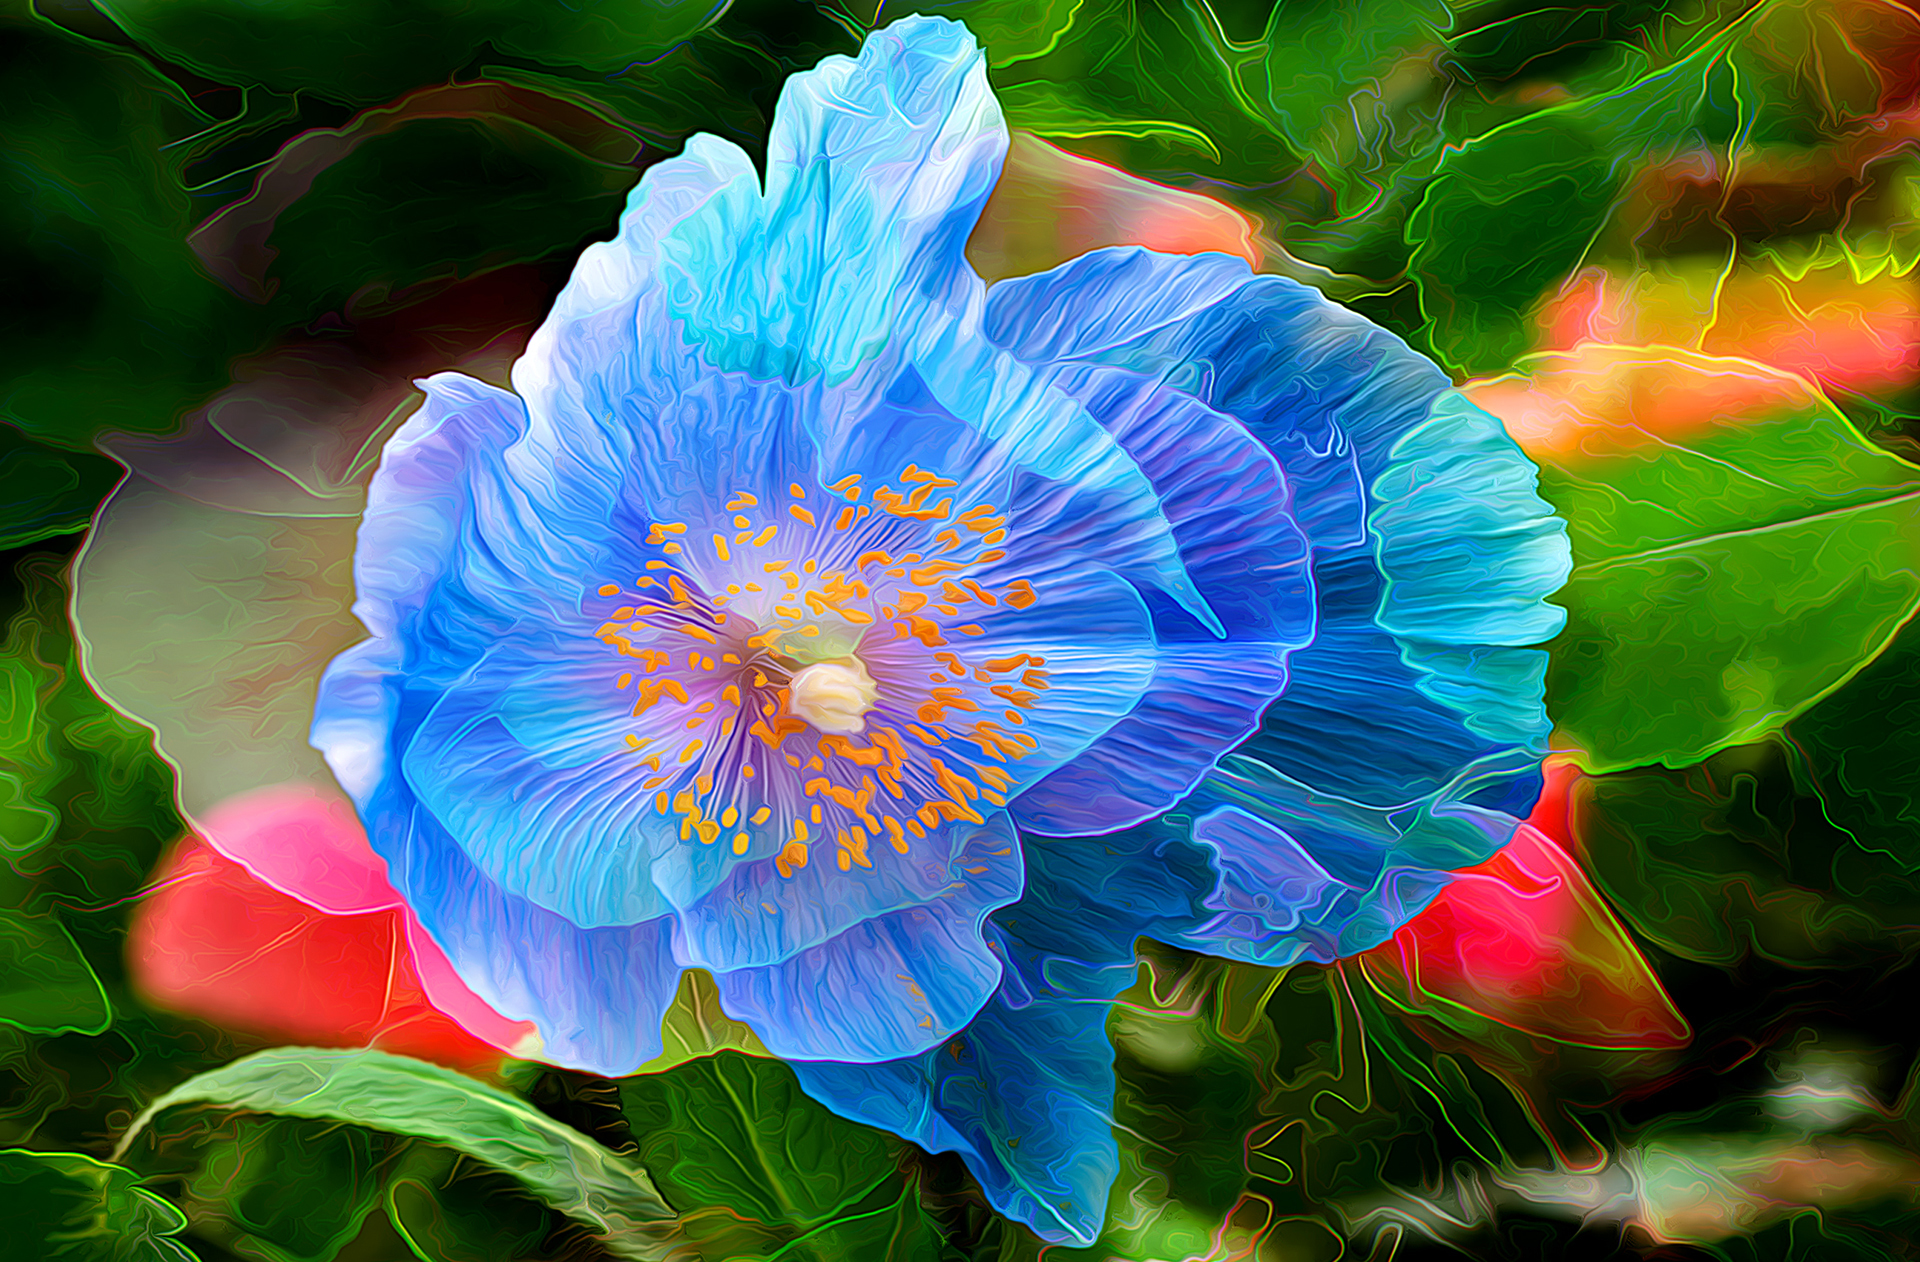 Painting of a Blue Flower